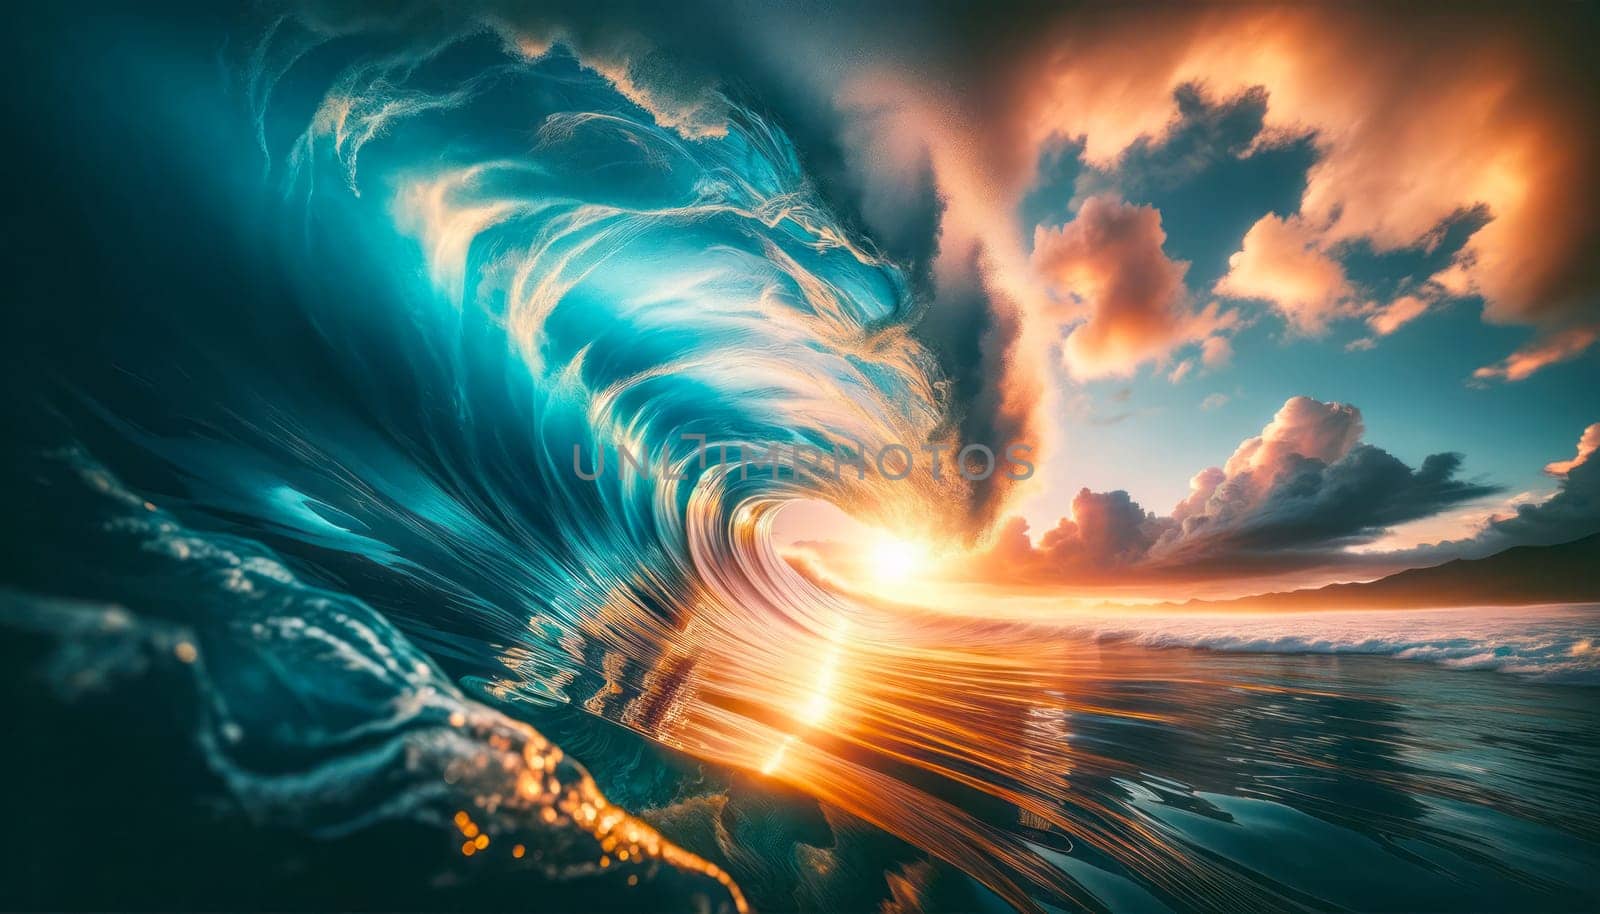 A wide-angle photography capturing a majestic wave during sunset. The image showcases the vibrant and dynamic wave in the foreground with a powerful curl and spray, tinted with shades of deep blue and turquoise. The sunlight filters through the wave, creating a bright, translucent area that reveals the motion of the water. The sky above is a dramatic backdrop with fiery orange and soft pink clouds, hinting at the setting sun on the horizon which casts a warm golden glow over the scene. The ocean's surface reflects the colors of the sky, completing this breathtaking moment of natural beauty.